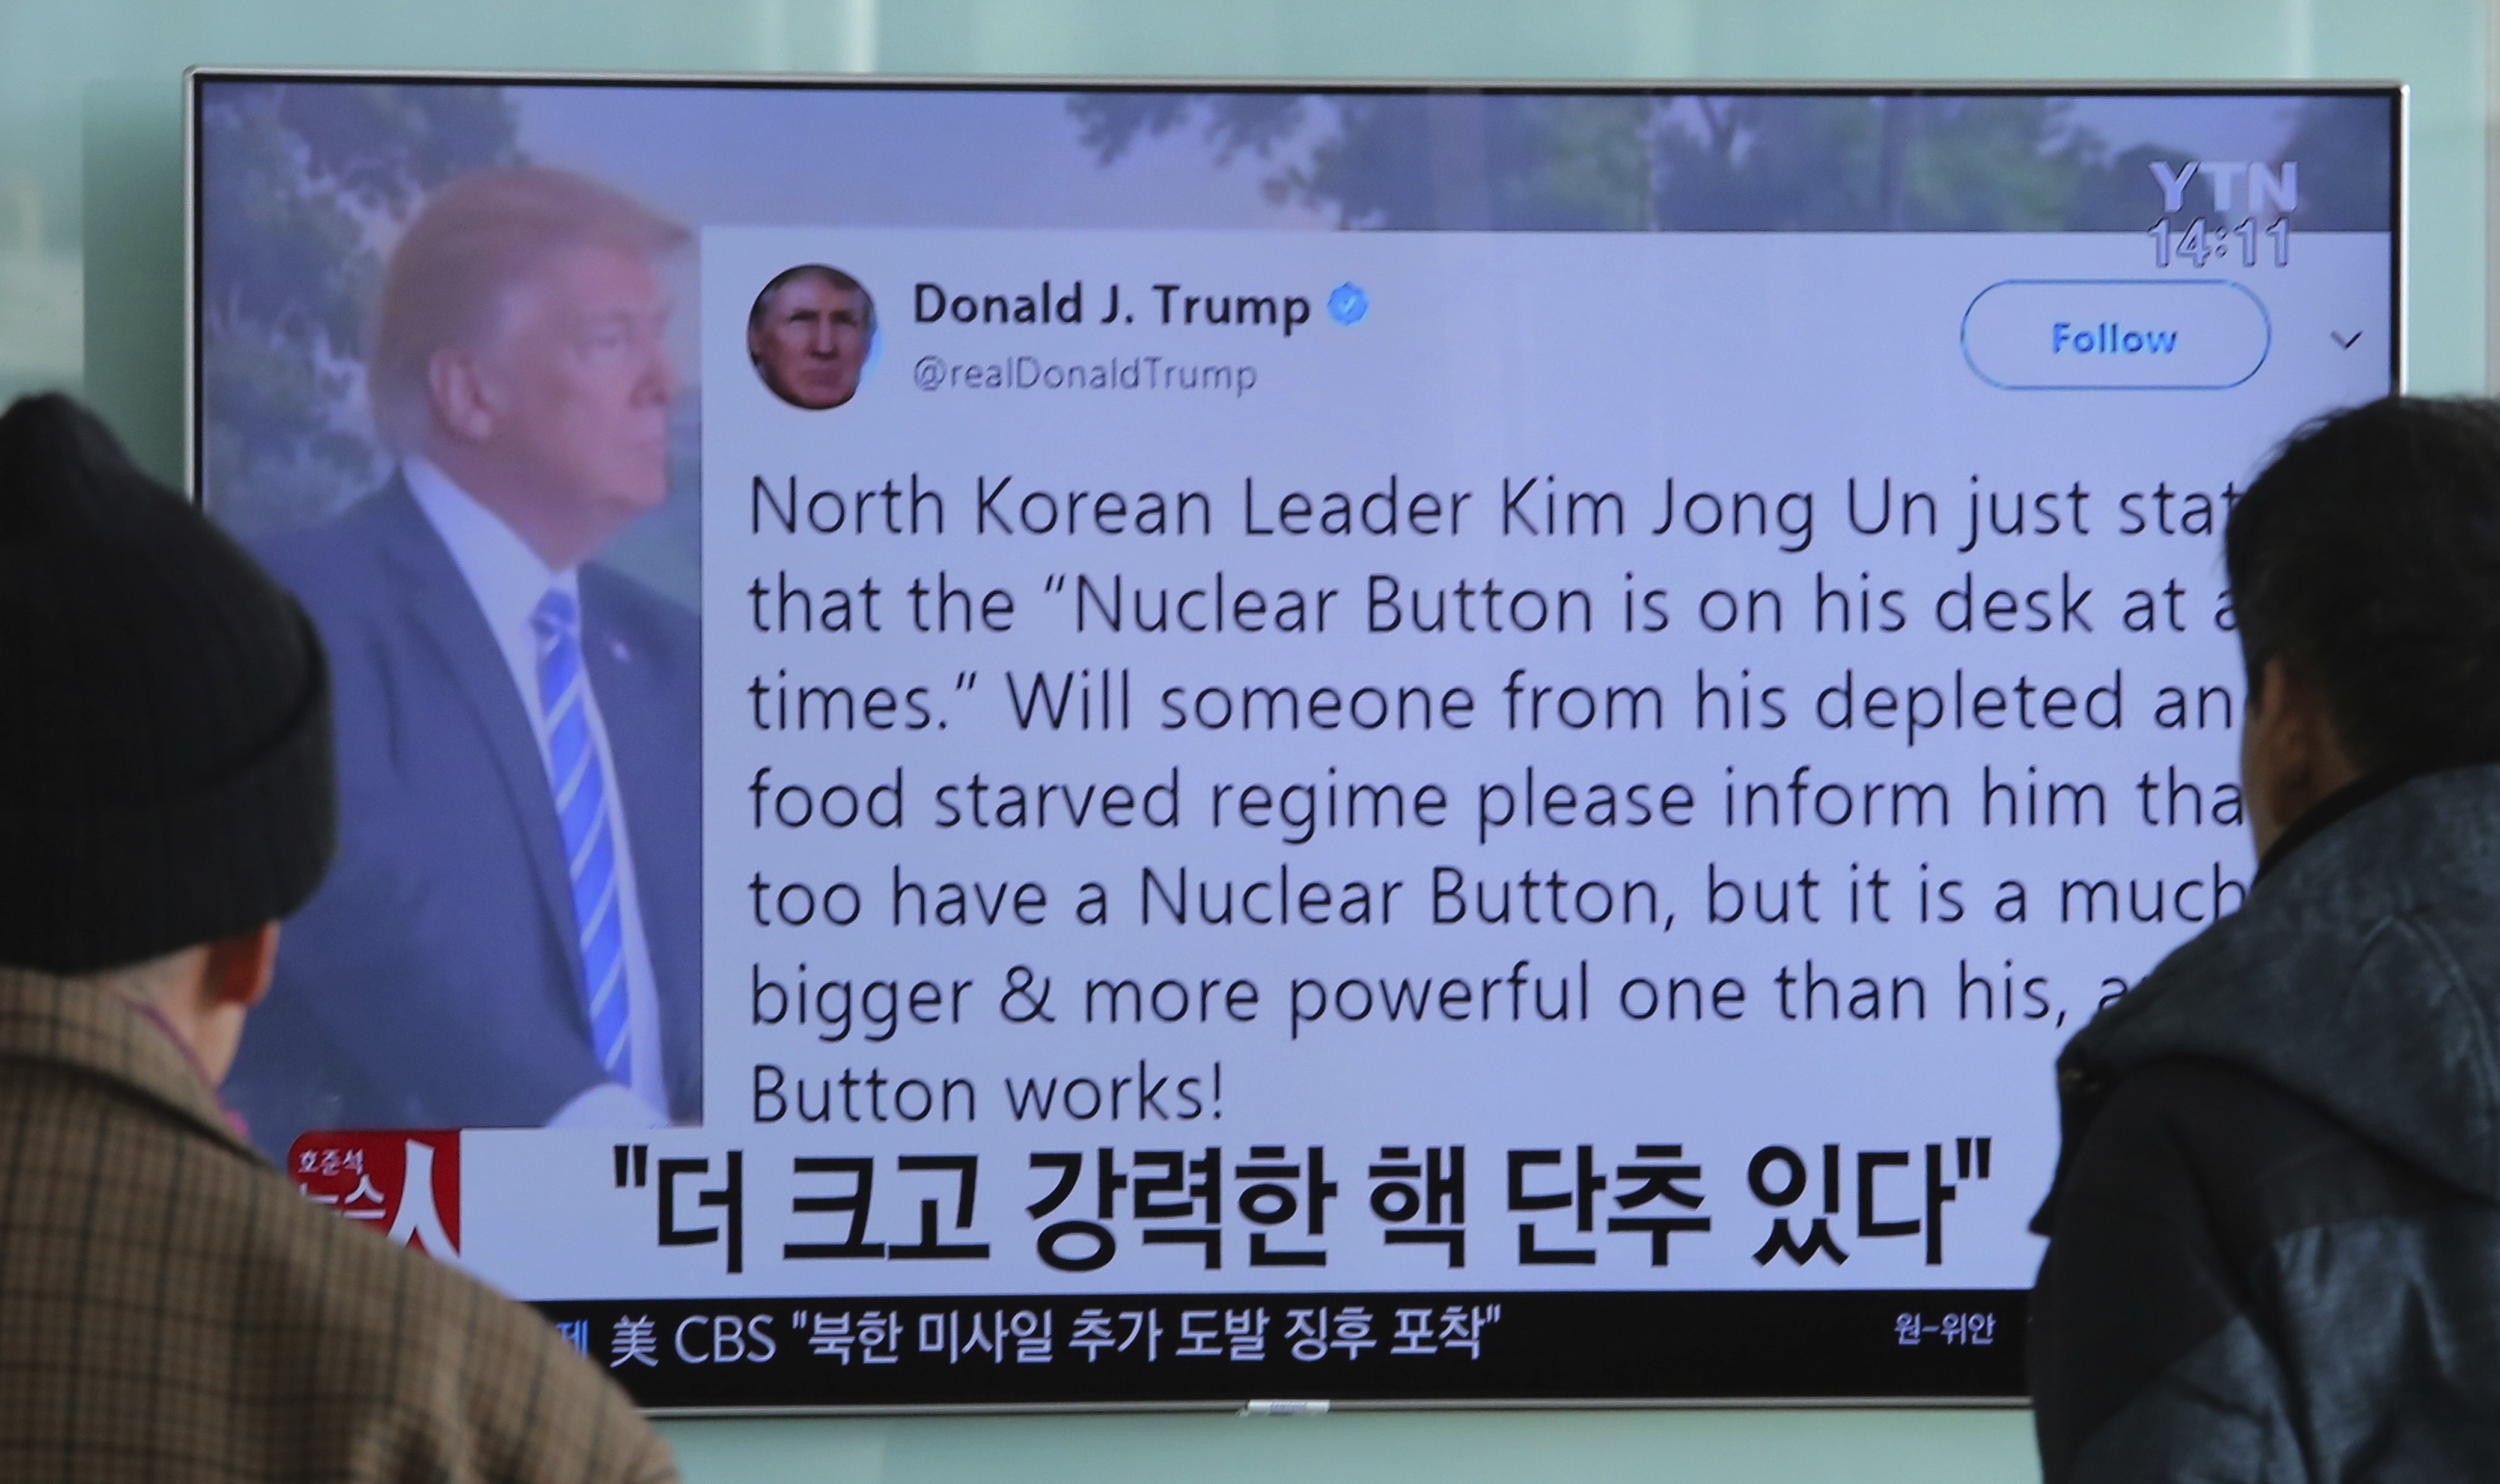 The US president’s boast about his bigger nuclear button has roots in imperialism’s use of phallic domination as a tool for power projection